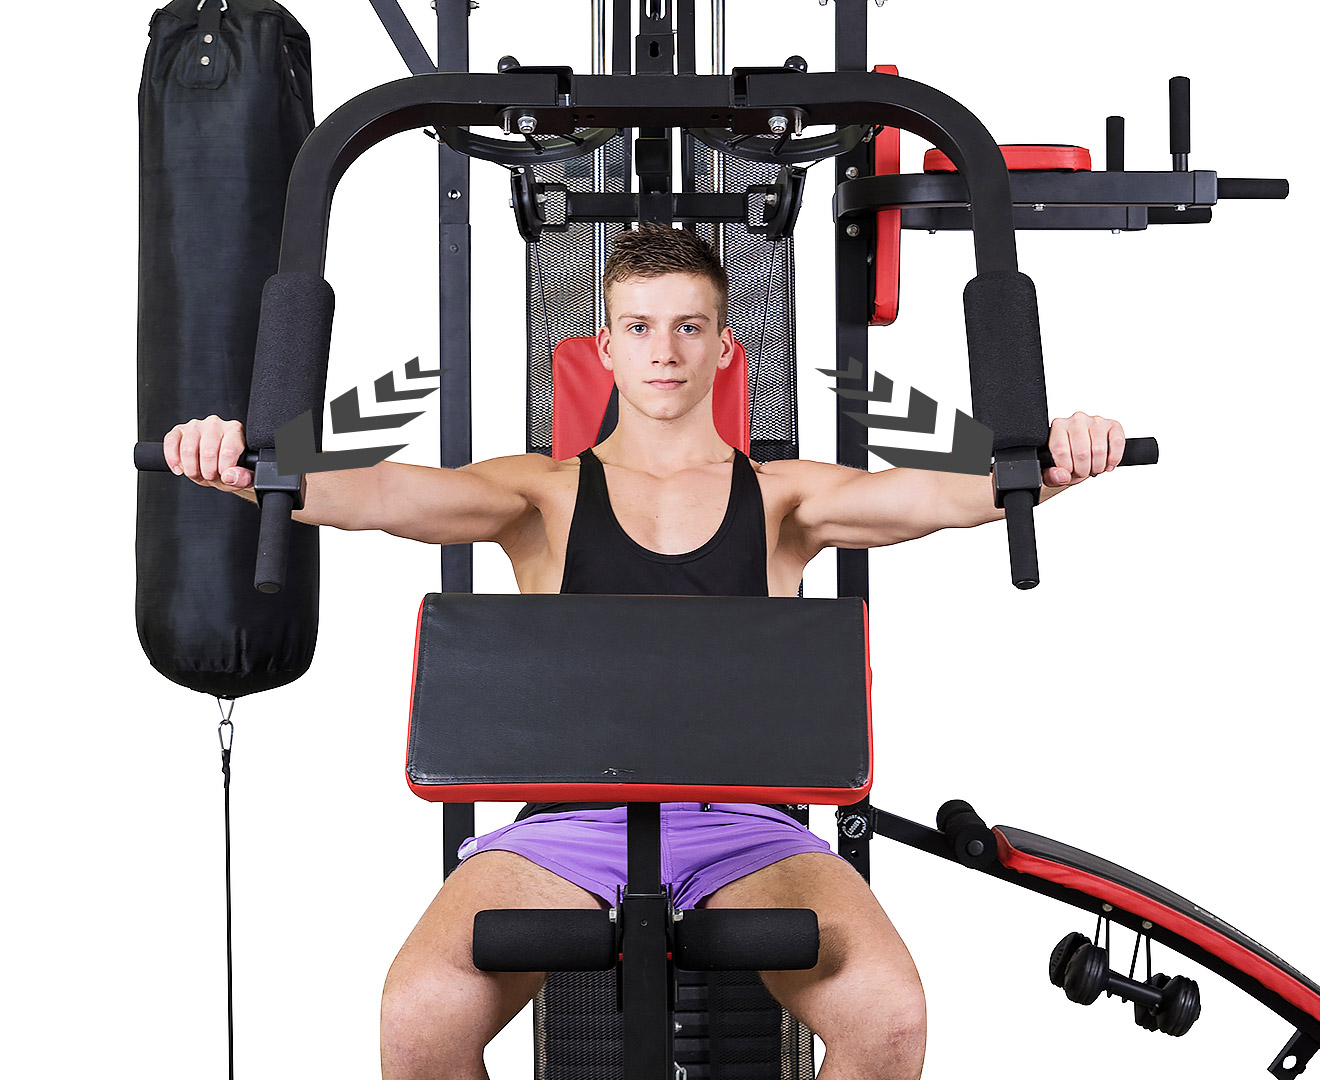 Multi-Station Home Gym with Punching Bag – 165lbs